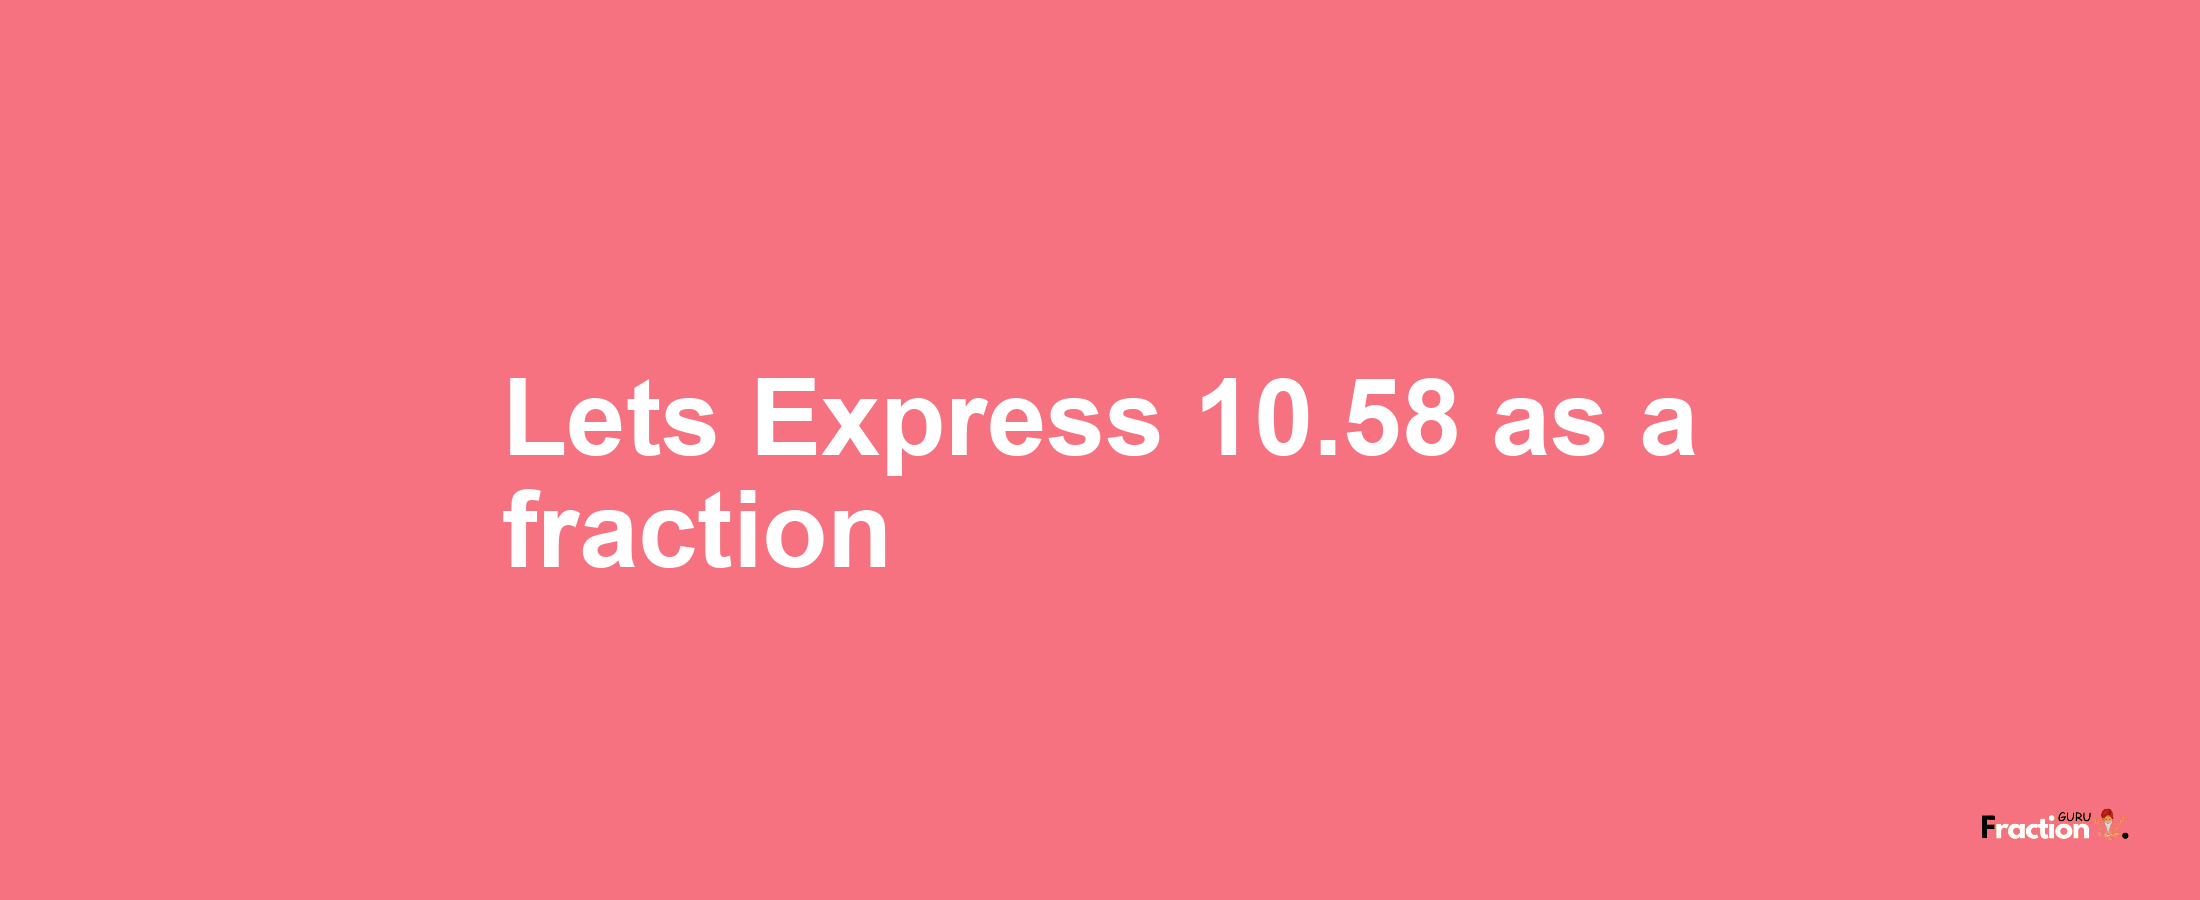 Lets Express 10.58 as afraction